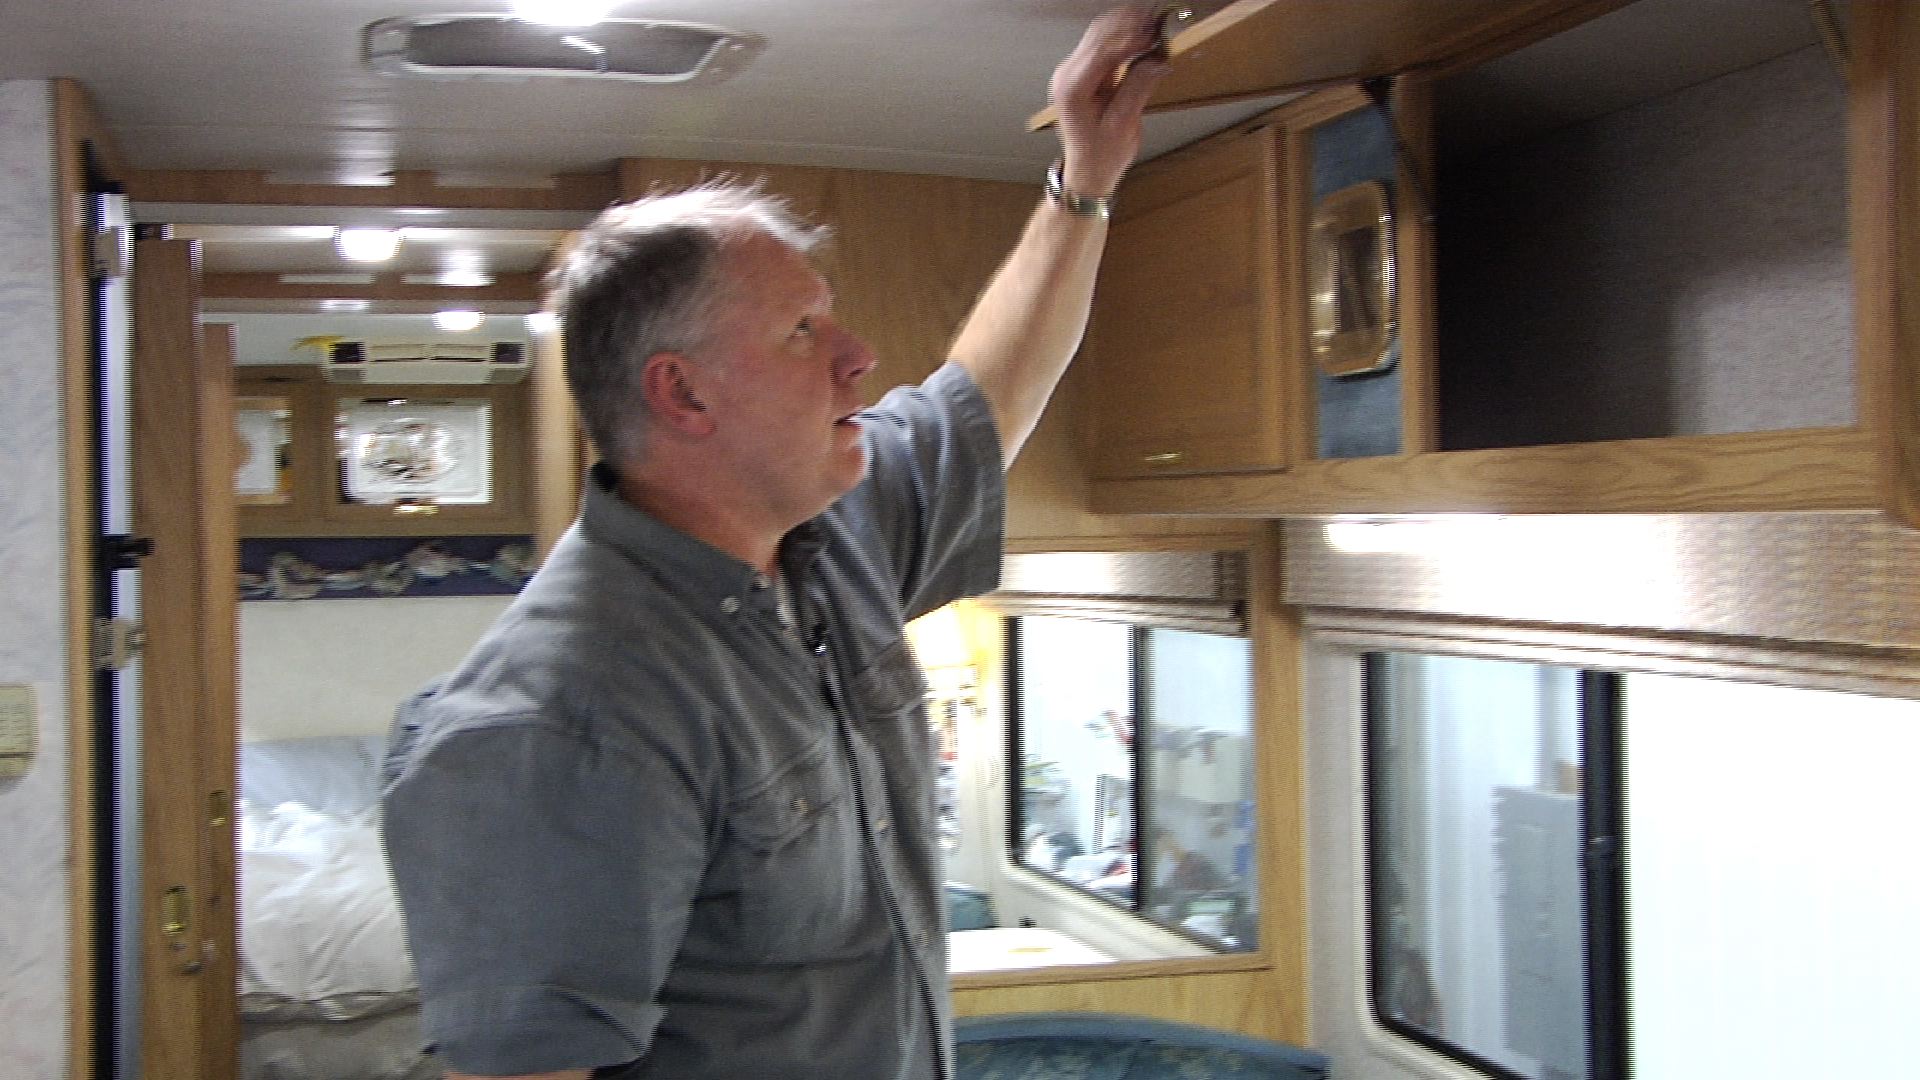 Tips for Quieting Your RV on the Road product featured image thumbnail.